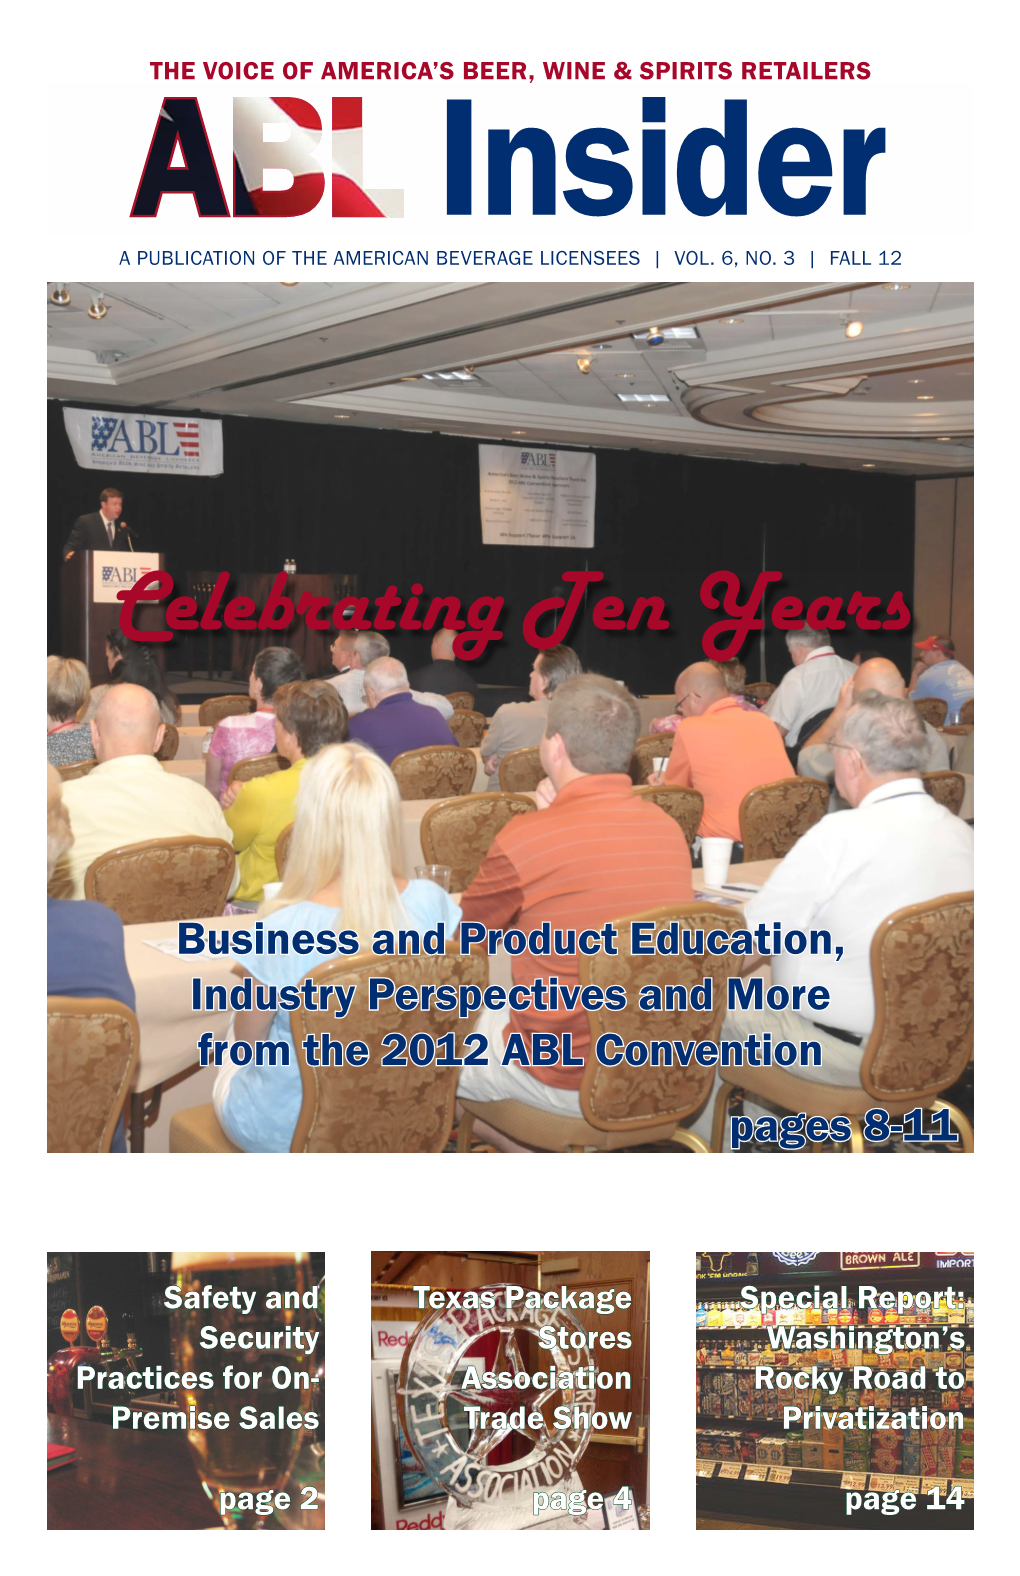 Business and Product Education, Industry Perspectives and More from the 2012 ABL Convention Pages 8-11